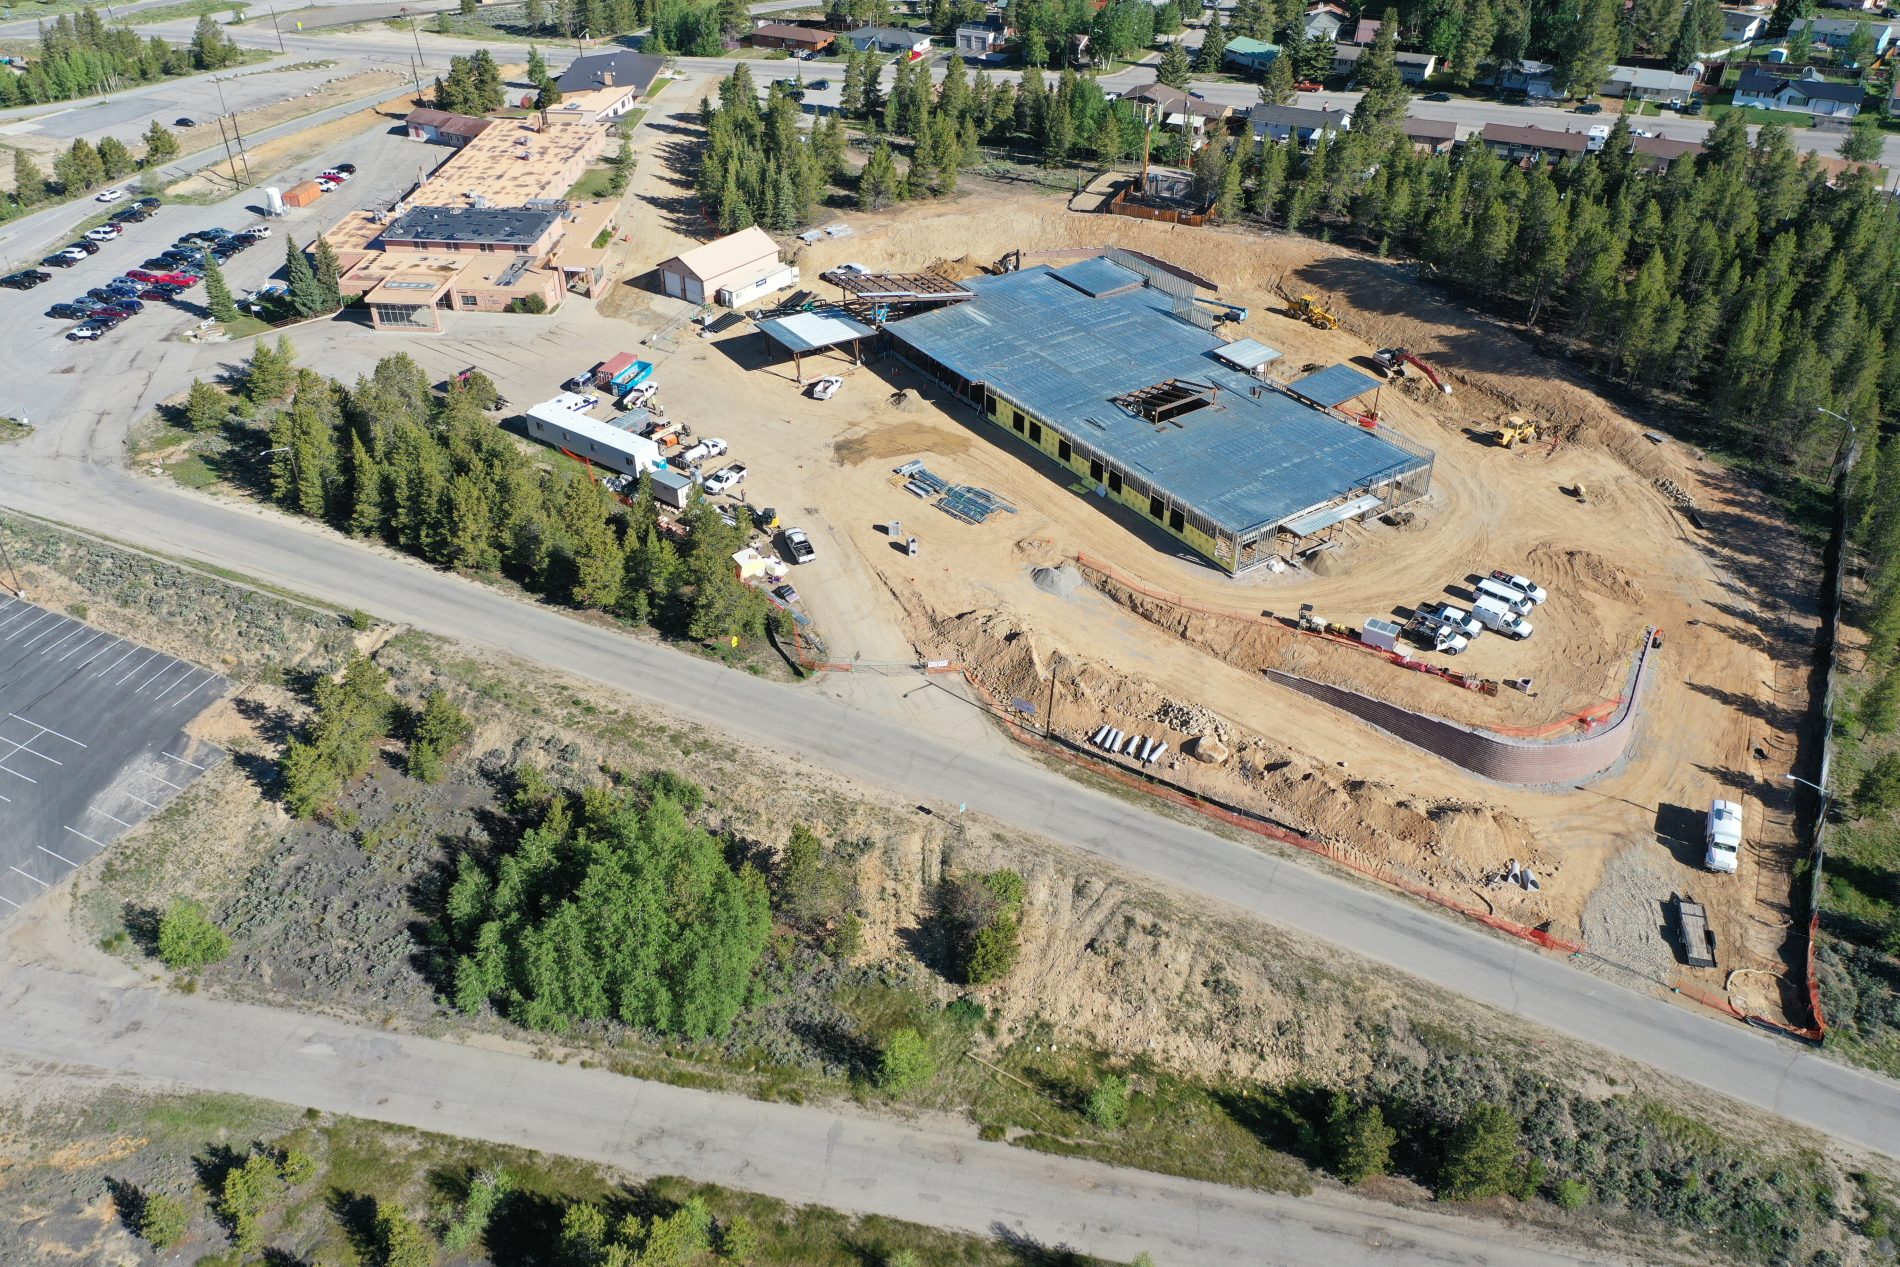 July progress drone footage posted